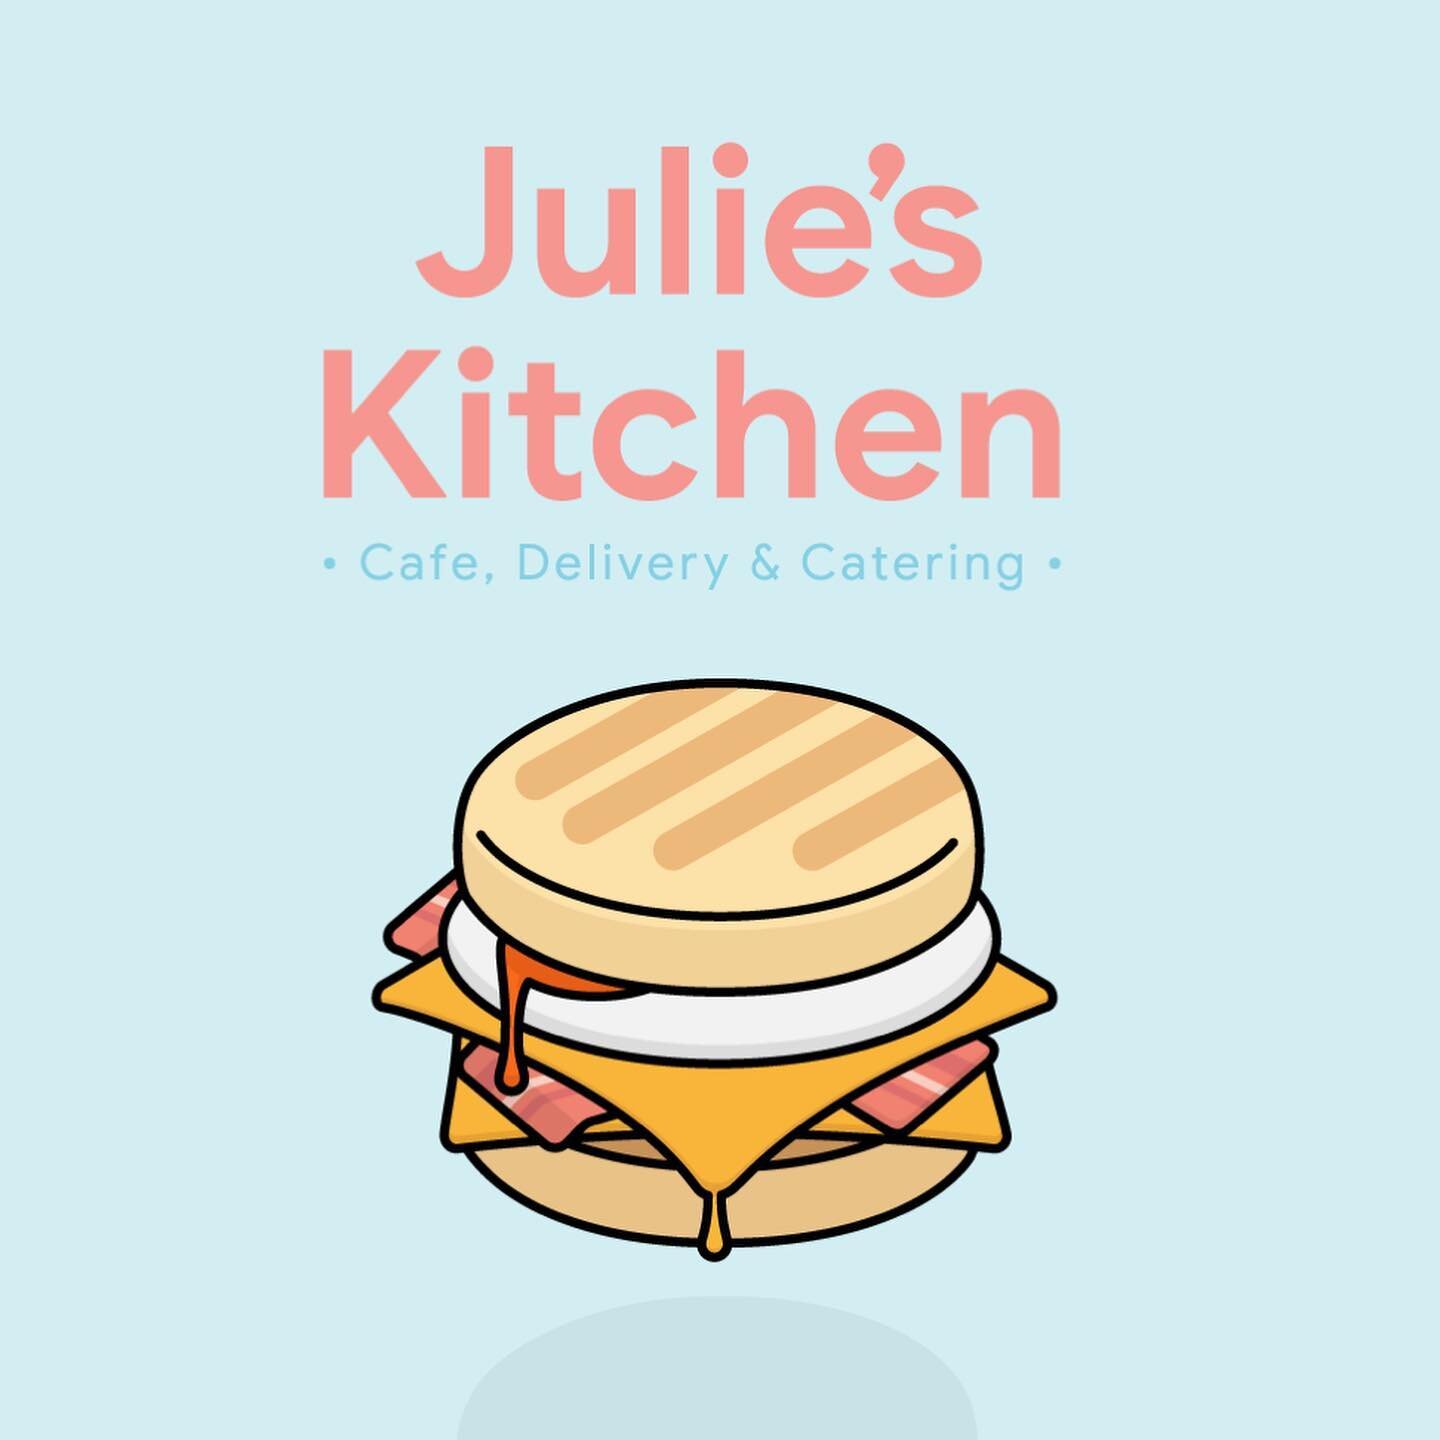 Had some fun illustrating one of the delicious breakfast muffins from @julieskitchendumbarton available for delivery 😎#breakfastinbed #lockdownlife